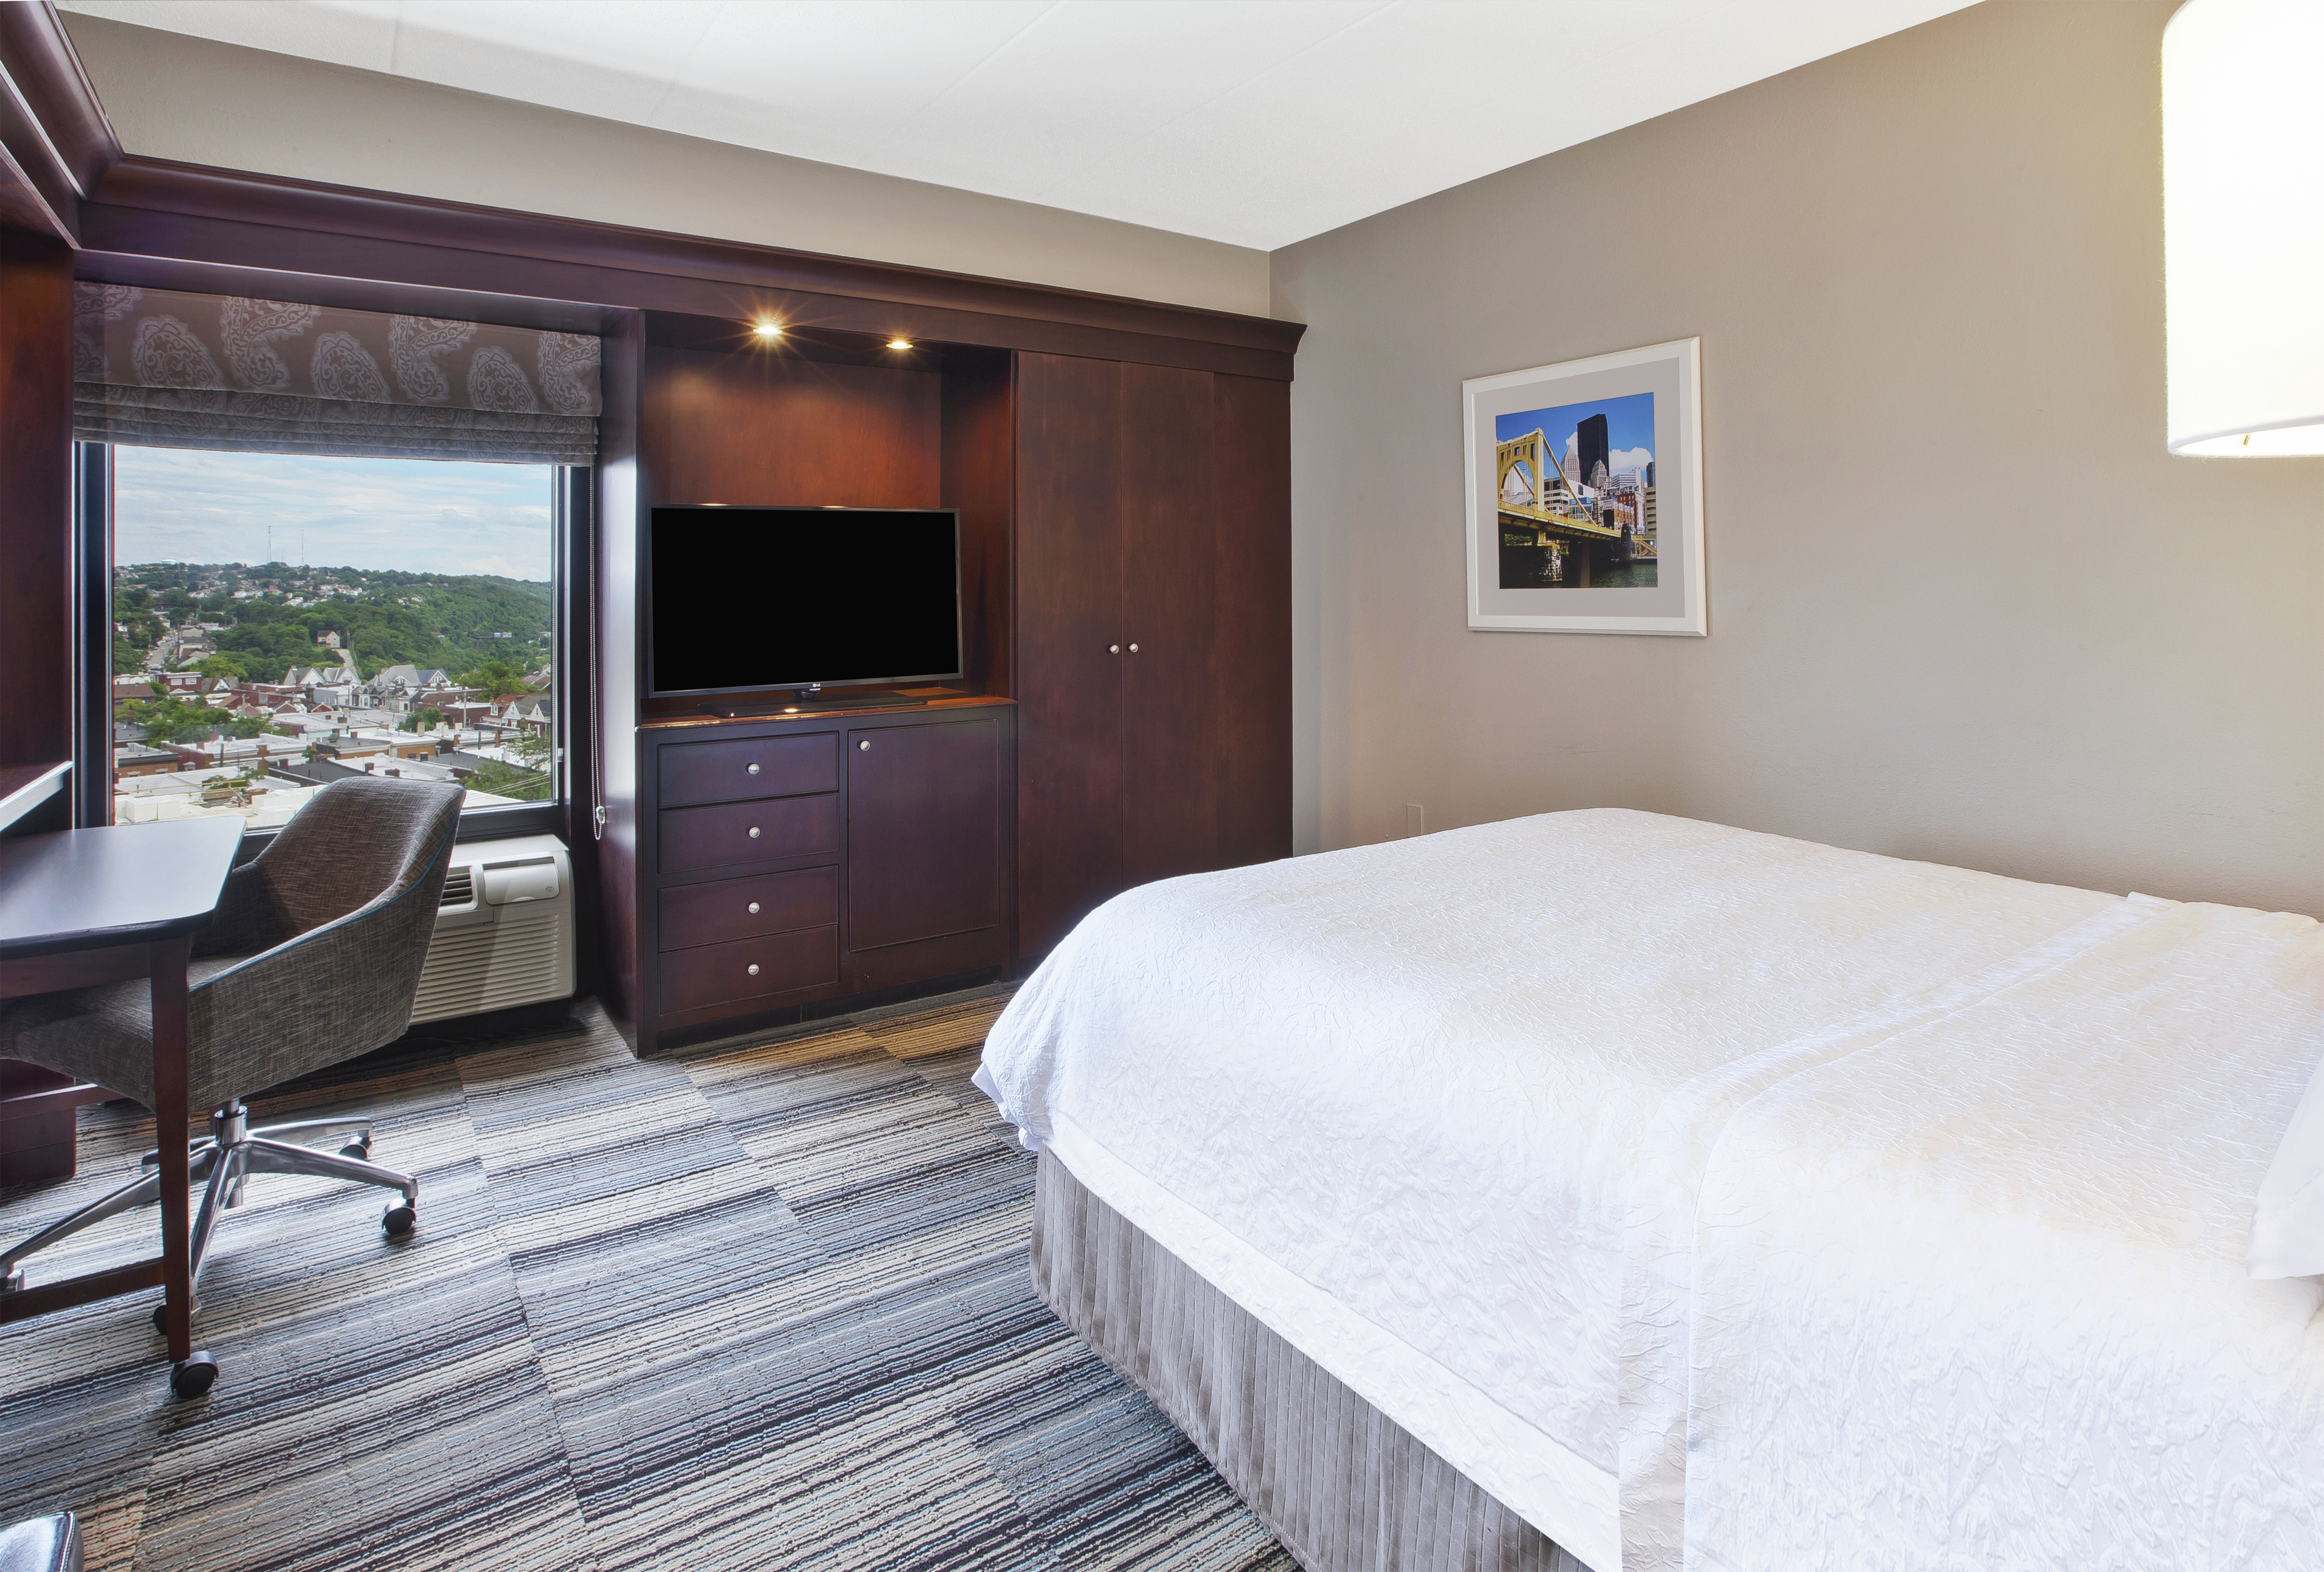 Queen Guestroom Bedroom with Bed, Room Technology, Work Desk. and Outside View